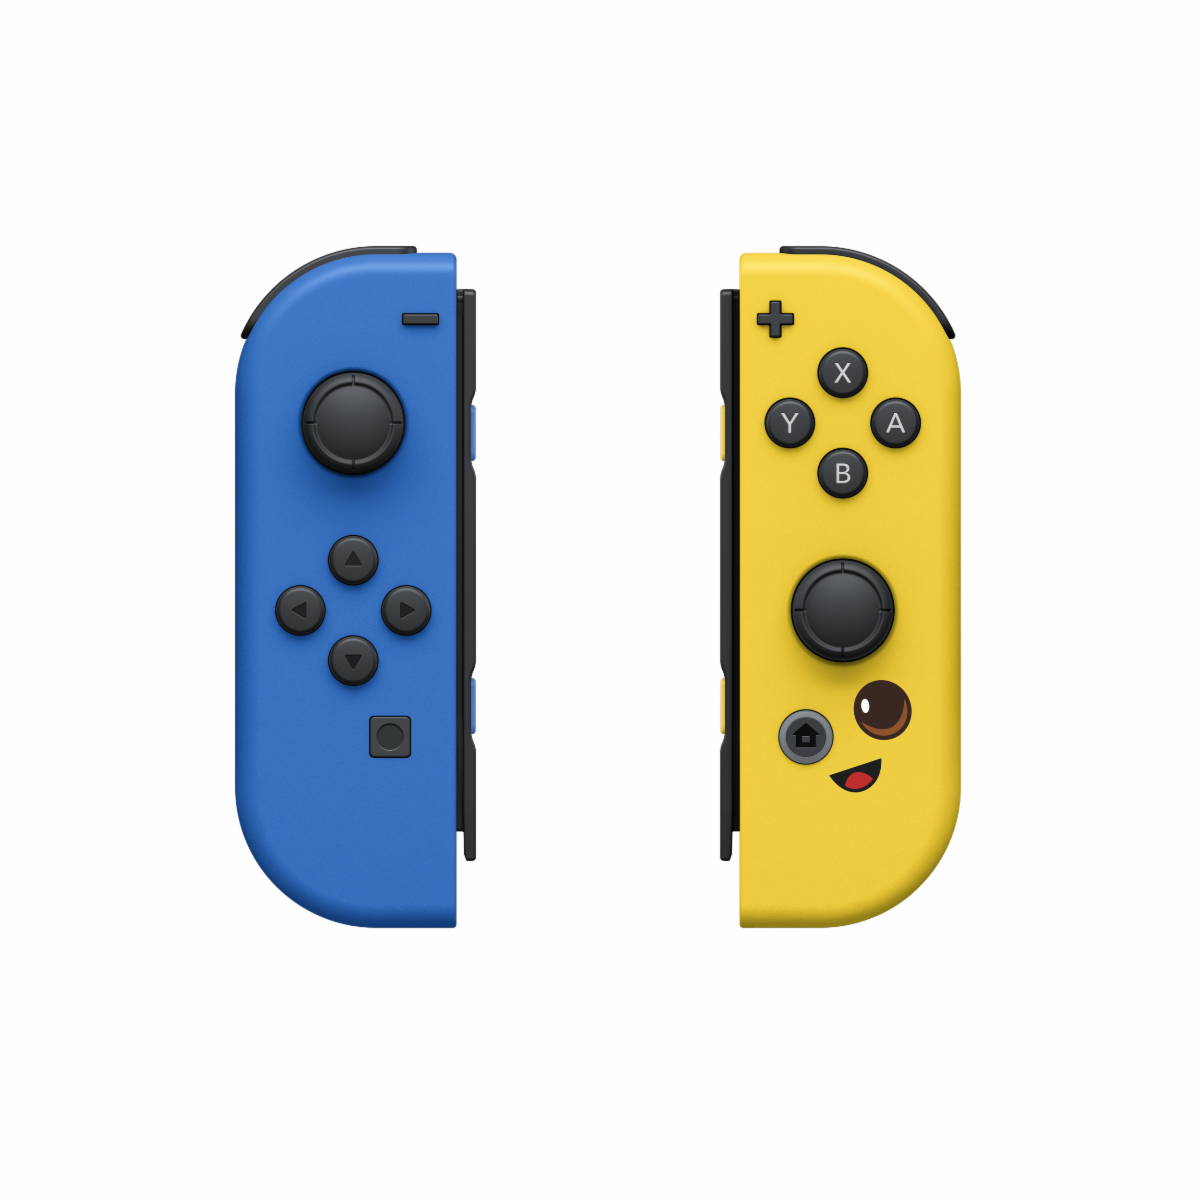 Fortnite Joy-Cons in blue and yellow